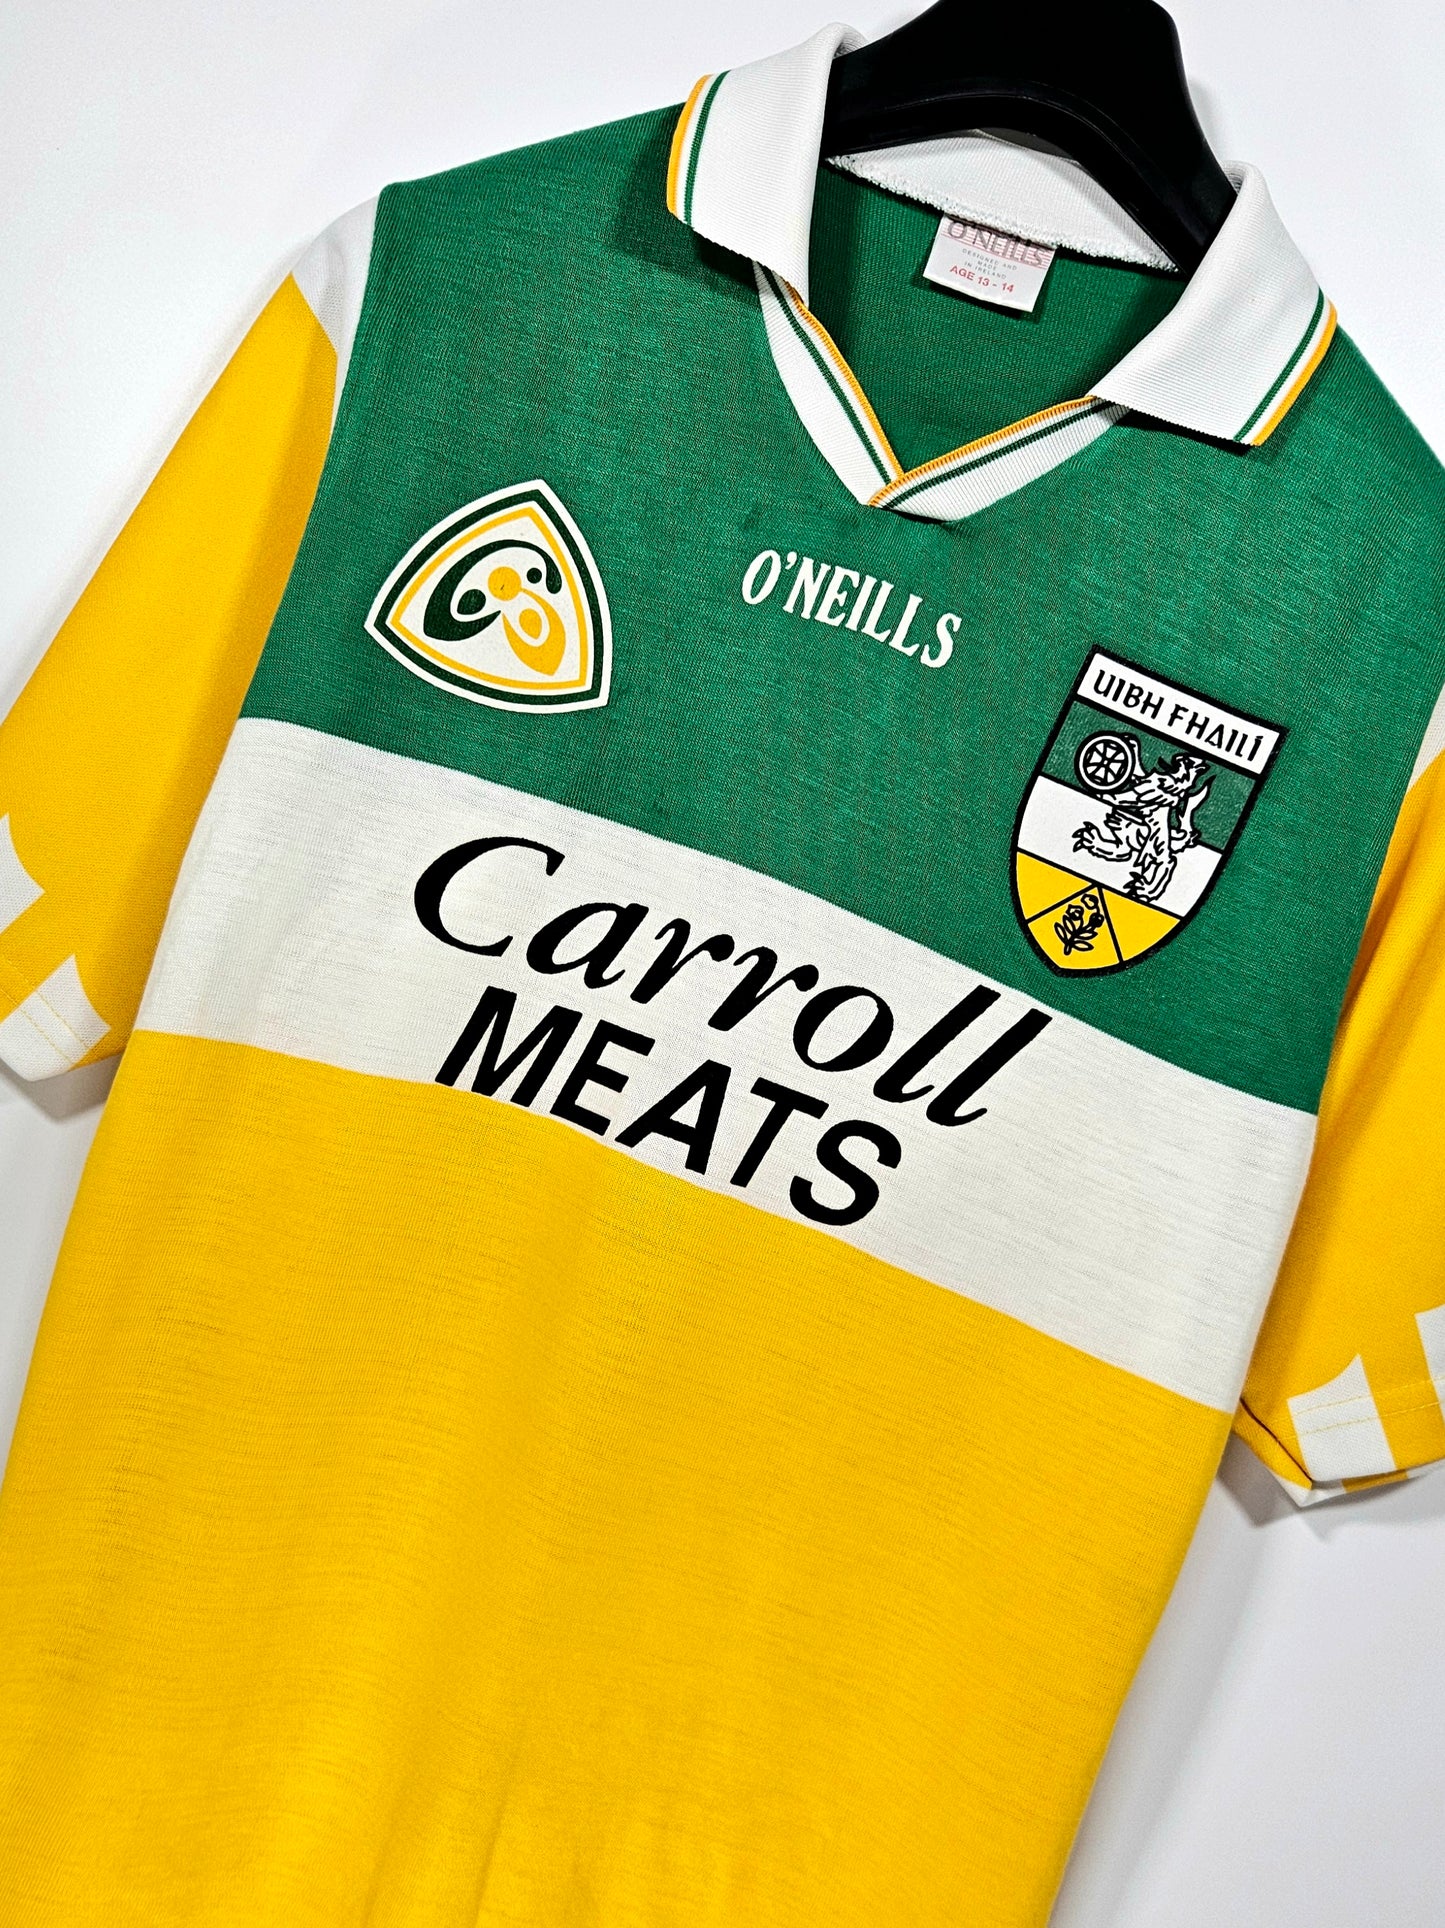 Offaly 1996 (Youths/Small)